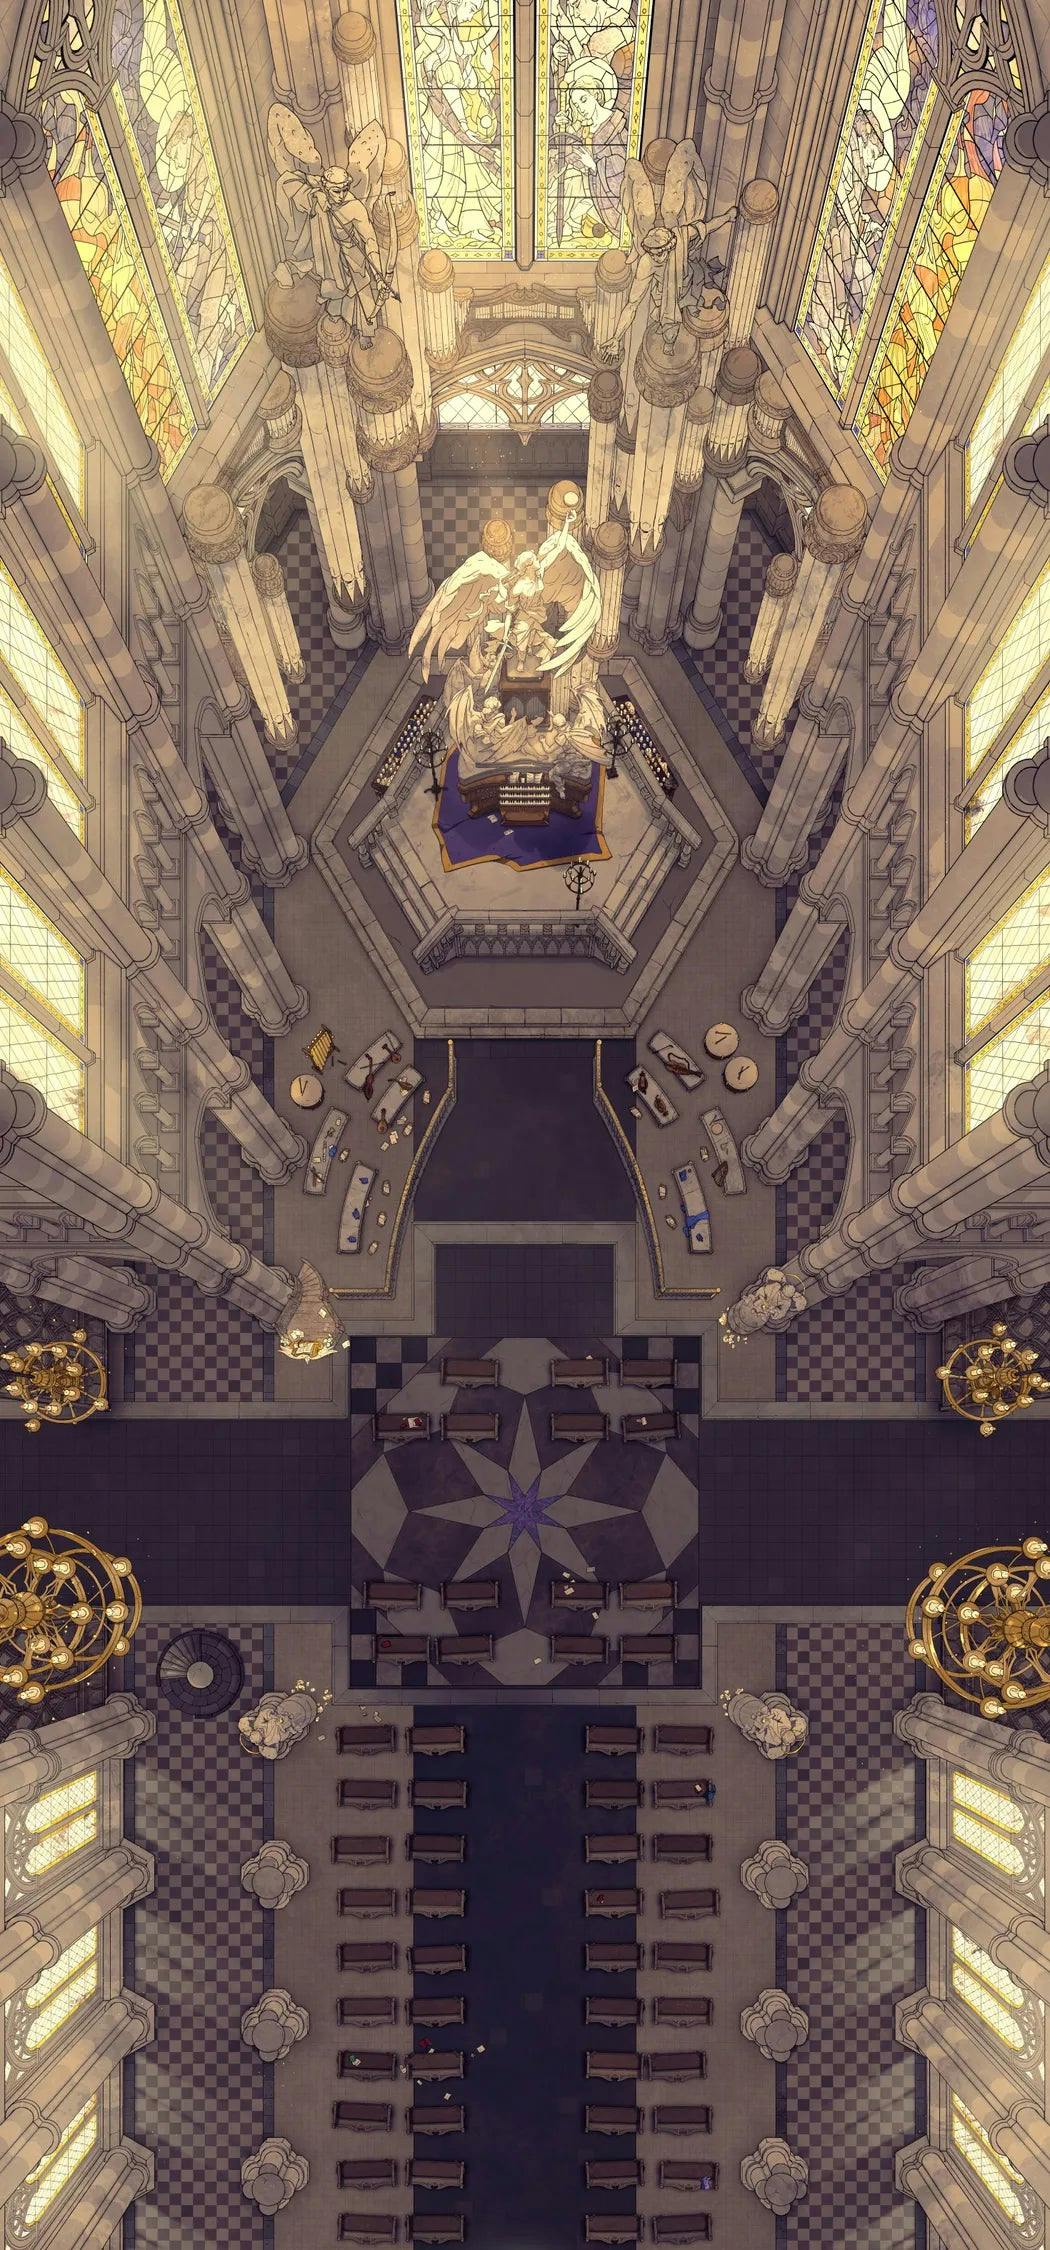 Grand Cathedral Interior Map - d006a3a01b0377f00f3ff960327be0c6